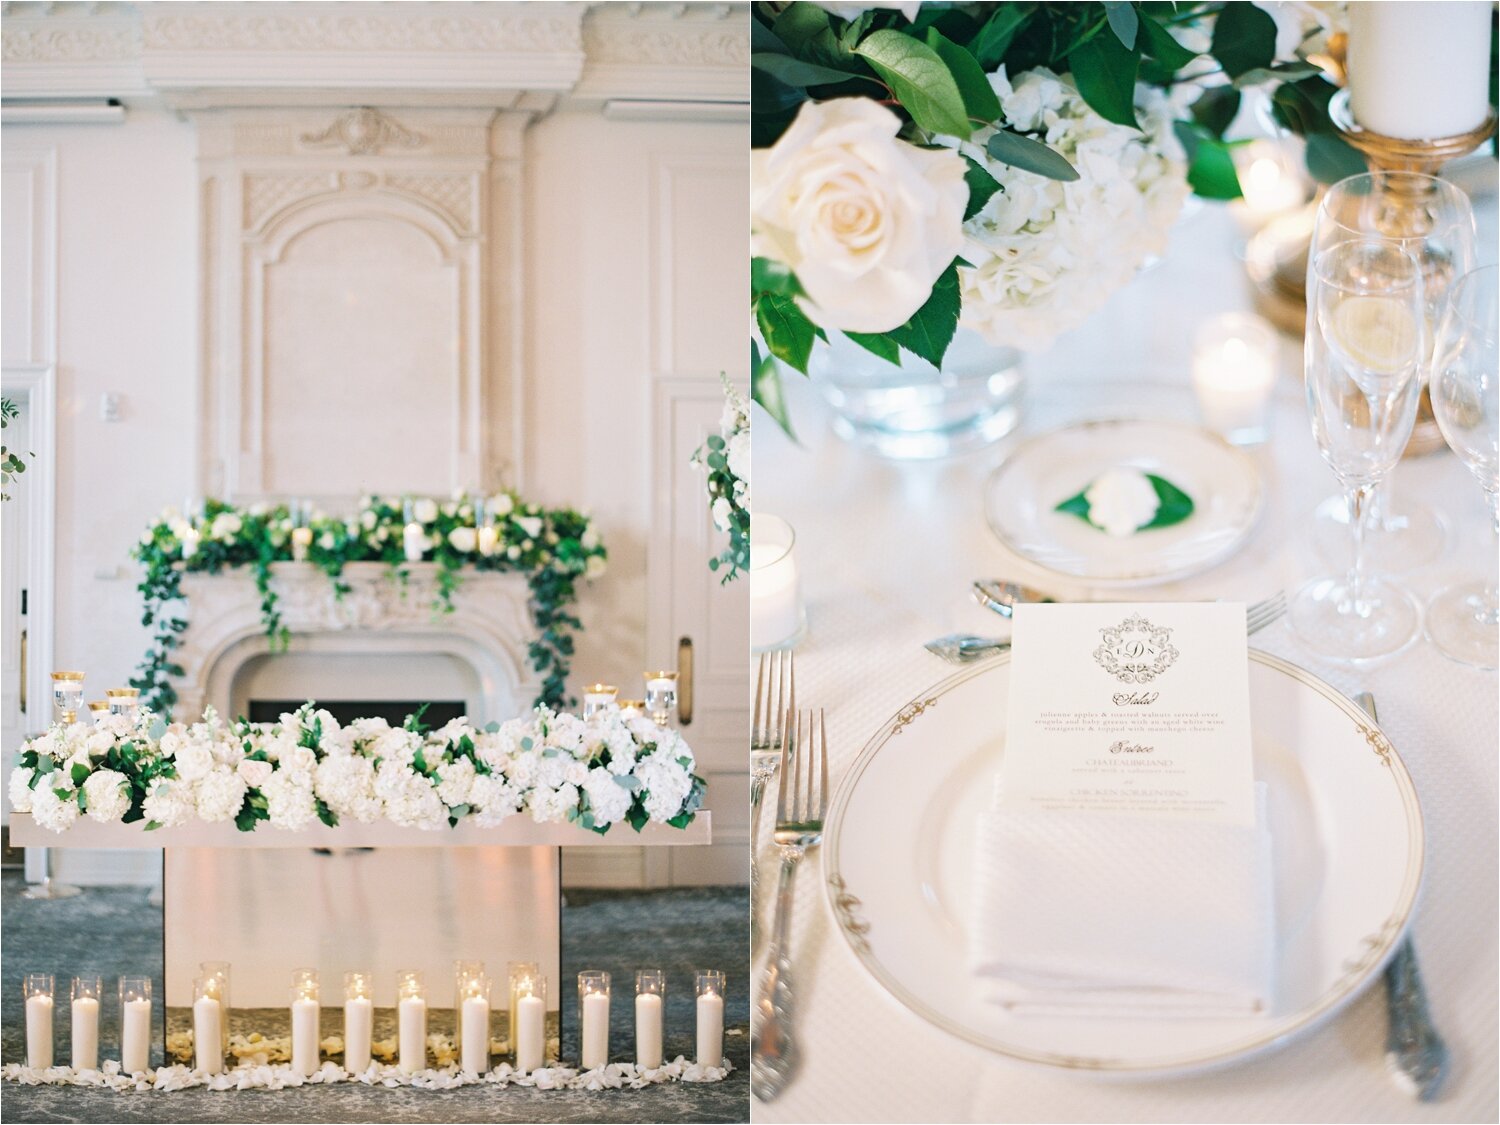 Luxury White, Green, and Gold Reception Decor at The Park Chateau